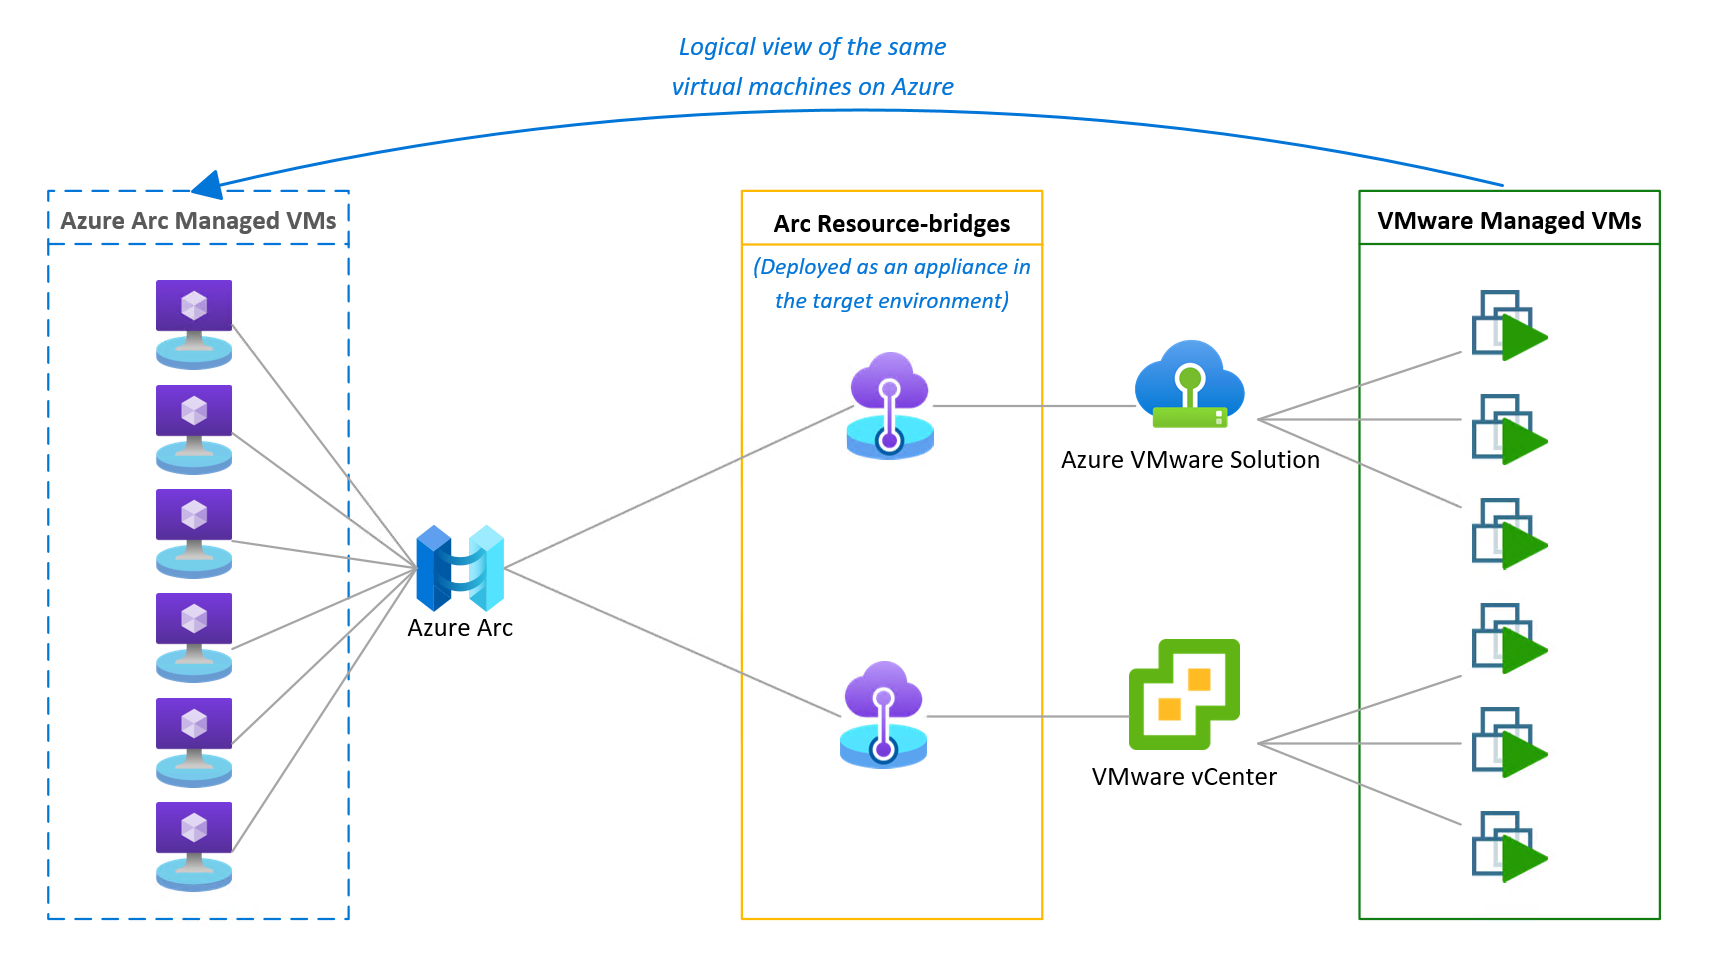 The Azure Arc Resource Bridge act as a gateway for Azure Arc to access and manage VMware based workloads.